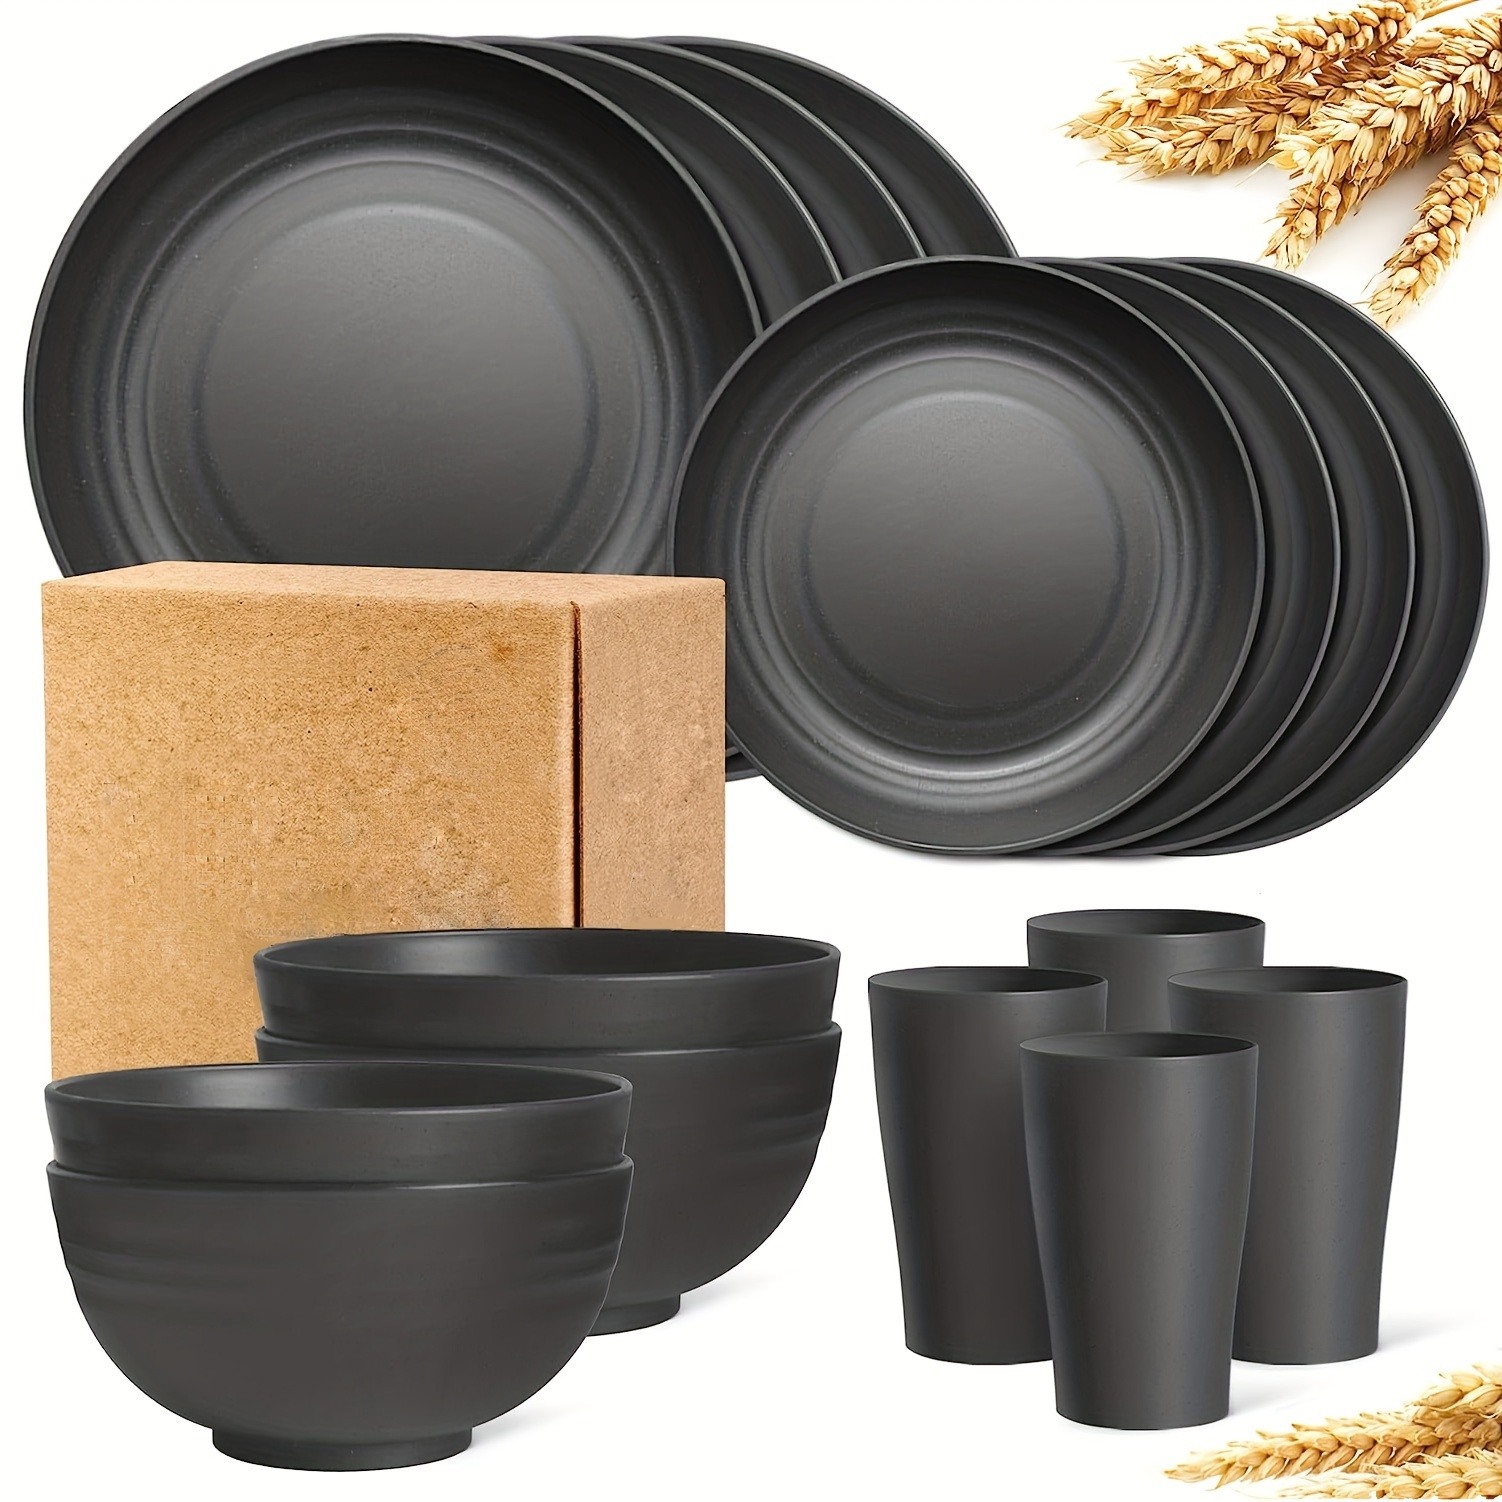 

16pcs/set Durable Wheat Straw Dinnerware Set - Microwave & Dishwasher Safe - Reusable Plates, Bowls, And Cups - Black (set Of 4) Perfect For Everyday Use!